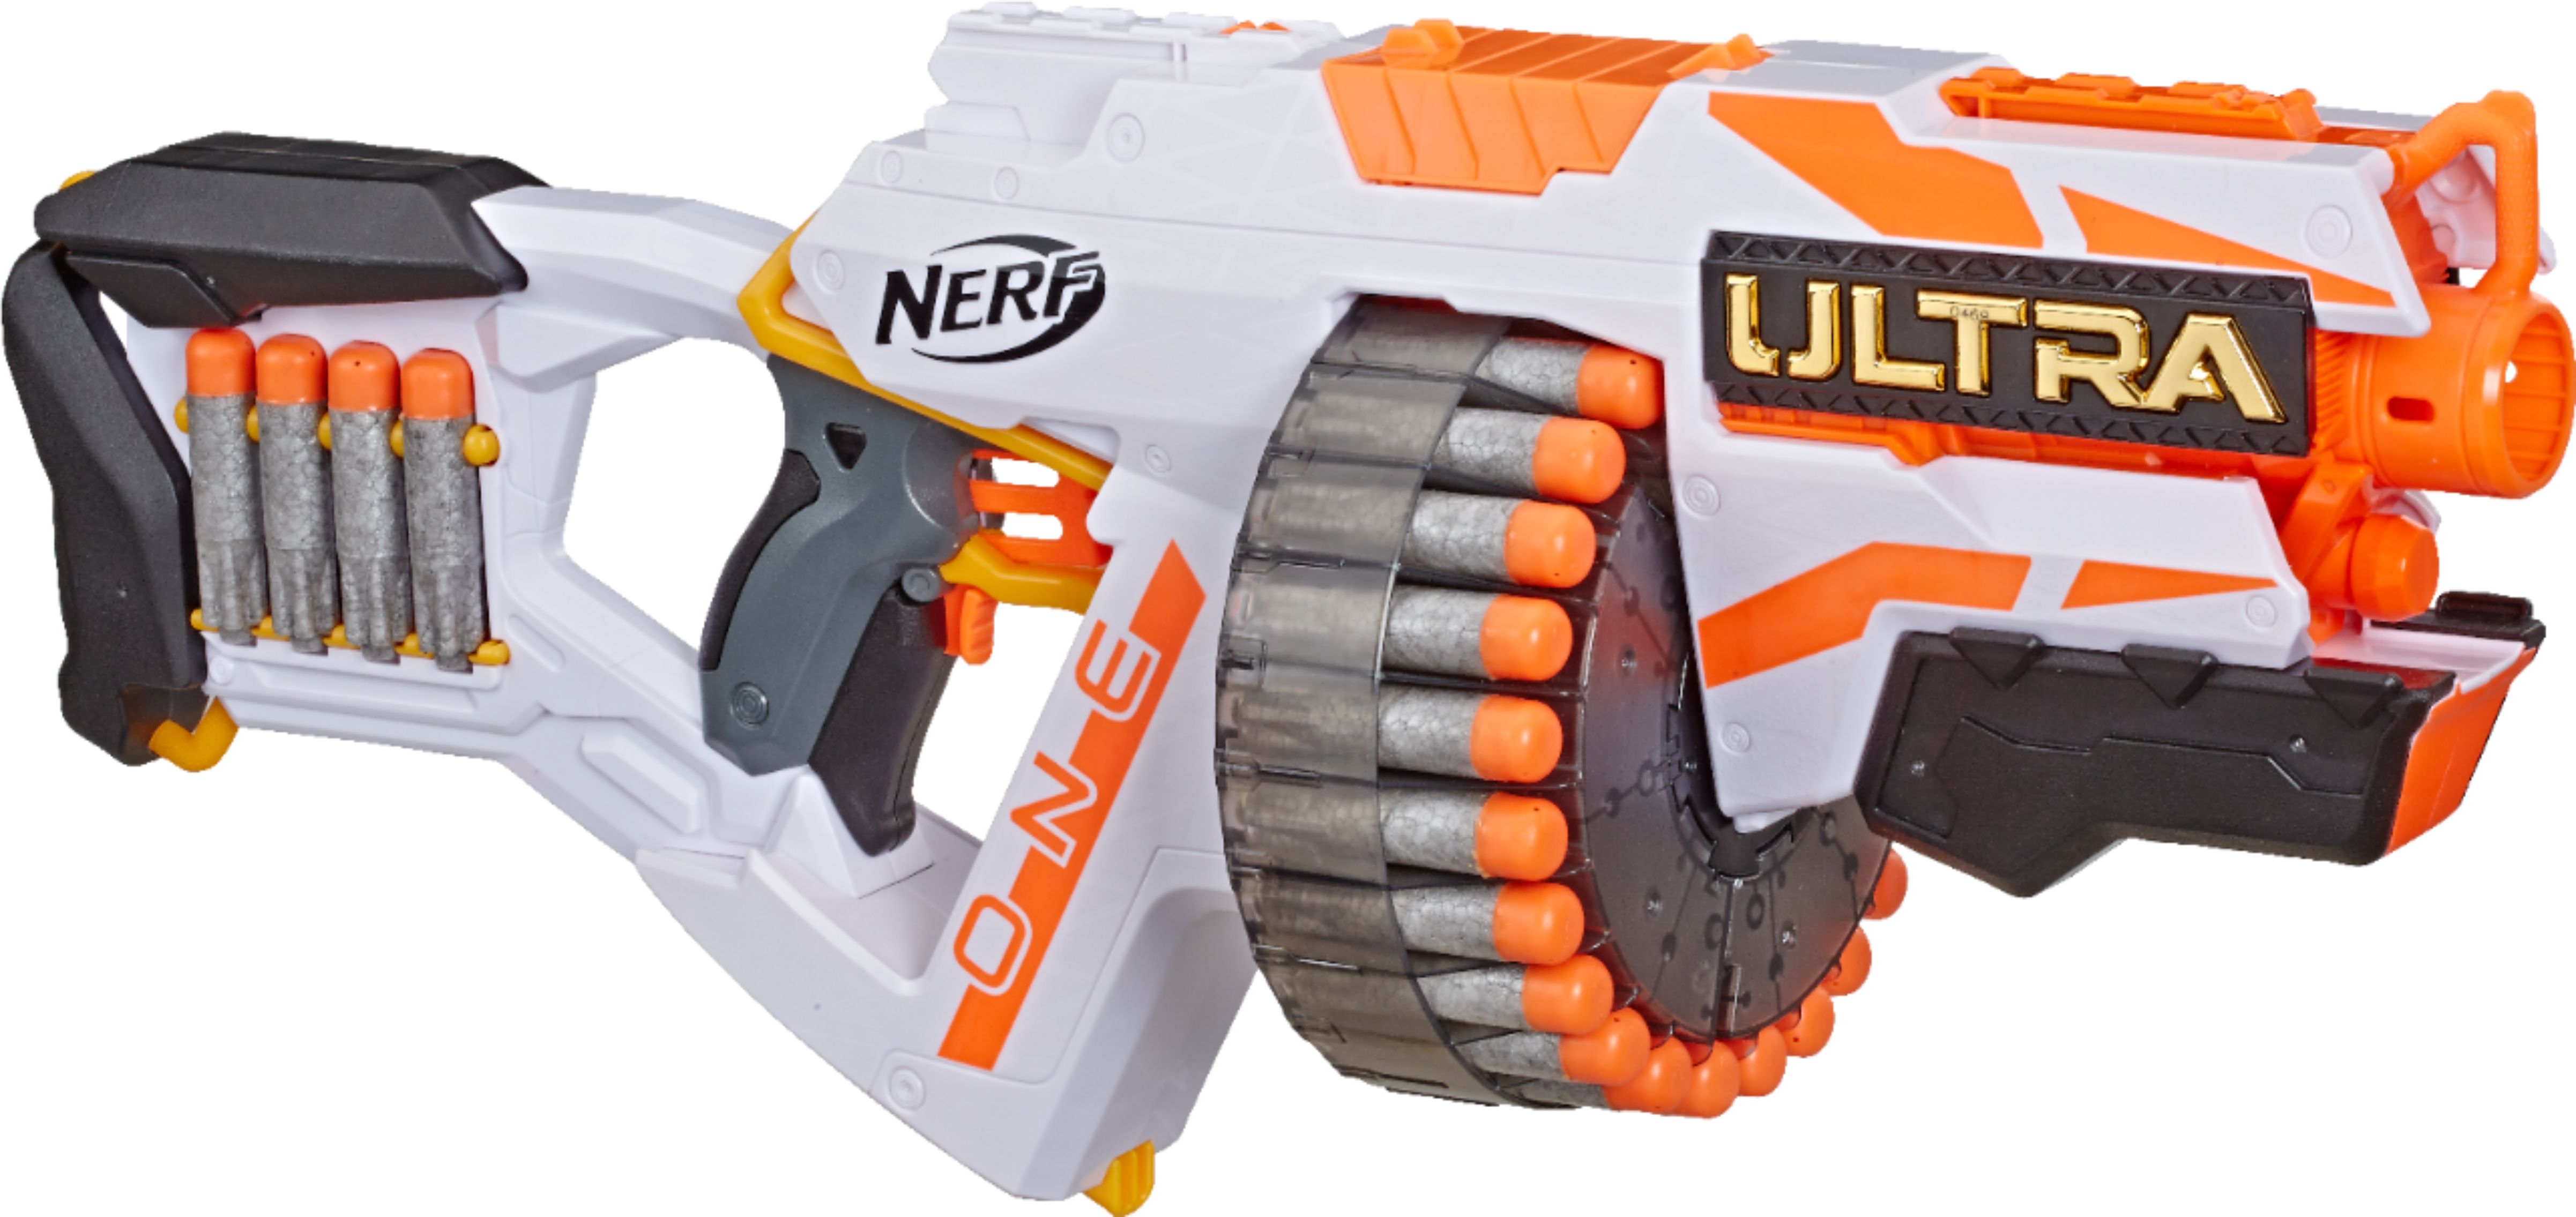 Questions and Answers: Nerf Ultra One Blaster E6596 - Best Buy